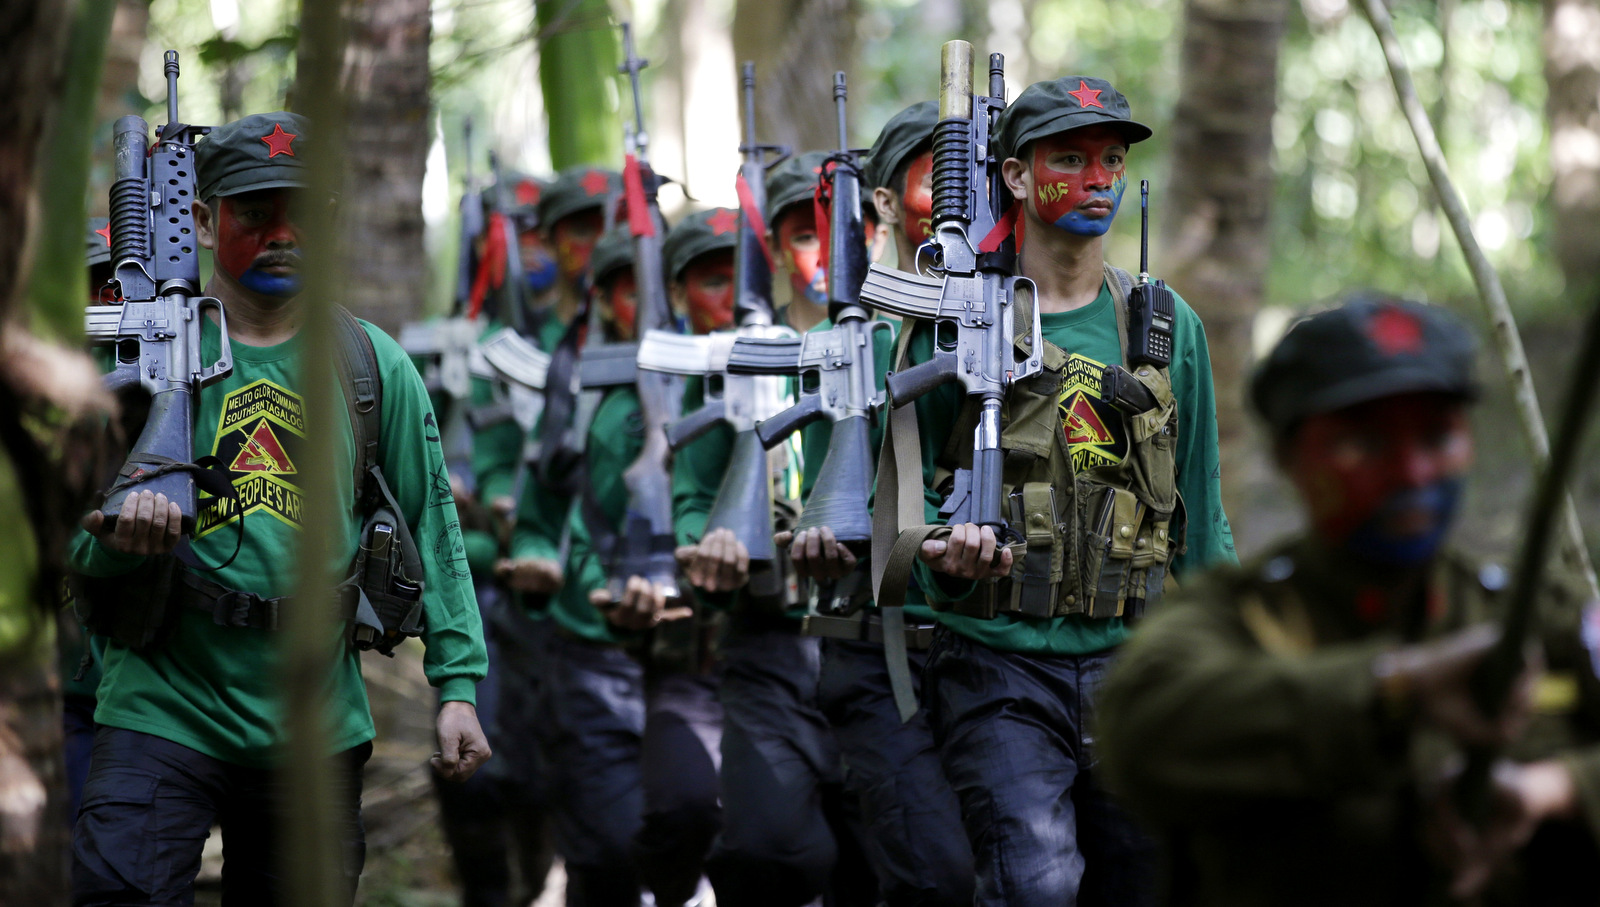 Members of the New People's Army march during the entry of colors as part of ceremonies before a news conference held at their guerrilla encampment tucked in the harsh wilderness of the Sierra Madre mountains southeast of Manila, Philippines. The group warns that a peace deal with President Rodrigo Duterte's government is unlikely if he won't end the Philippines' treaty alliance with the United States and resist control by other countries, Nov. 23, 2016. (AP/Aaron Favila)